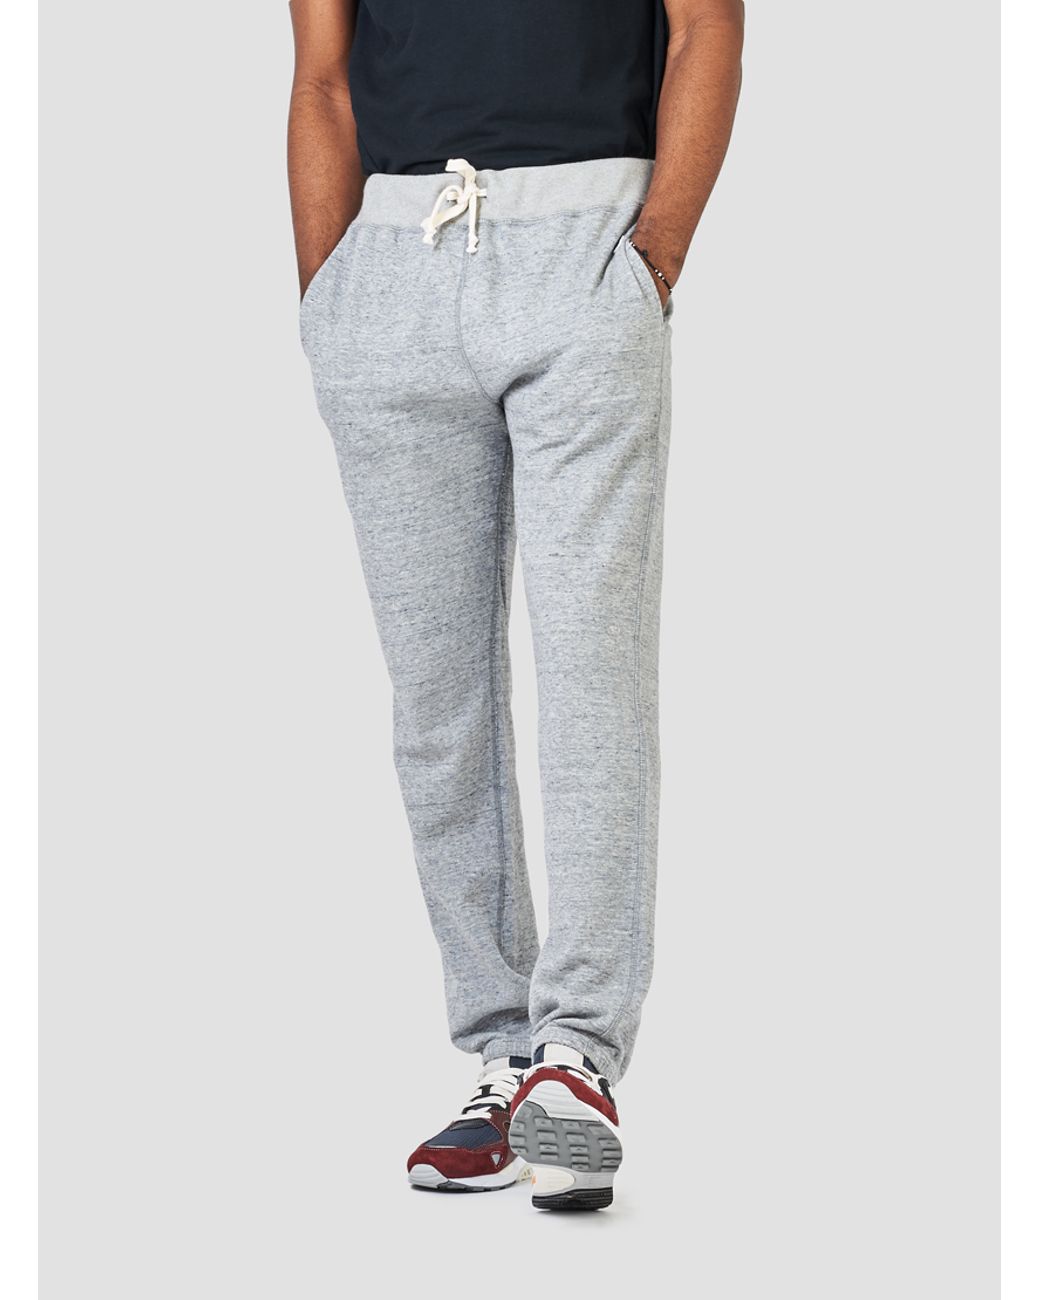 Champion Classic Sweatpants Heather Grey in Grey for Men